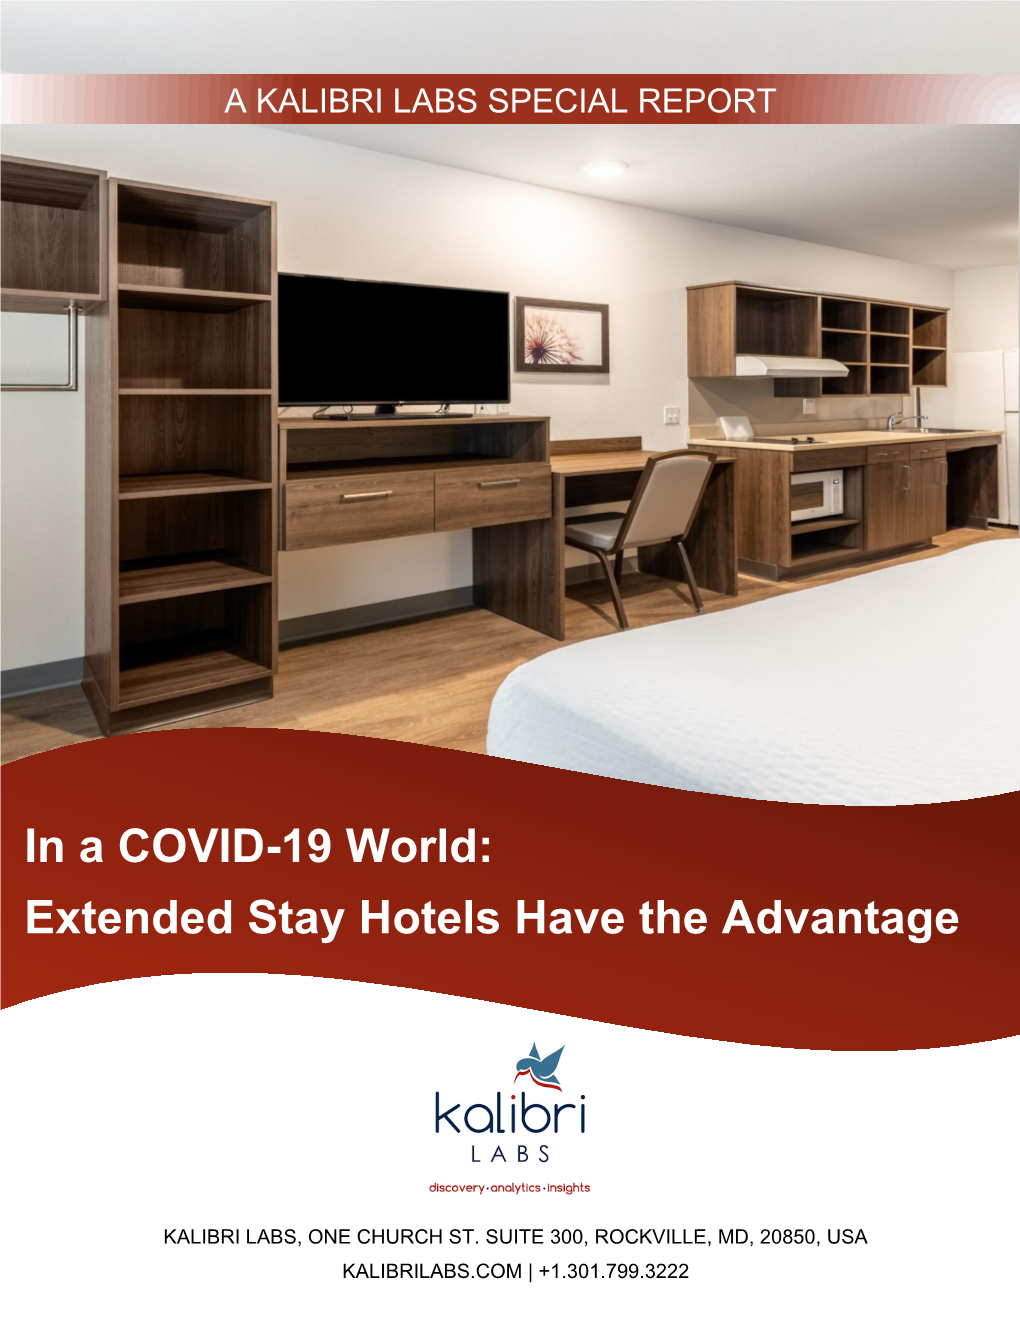 In a COVID-19 World: Extended Stay Hotels Have the Advantage